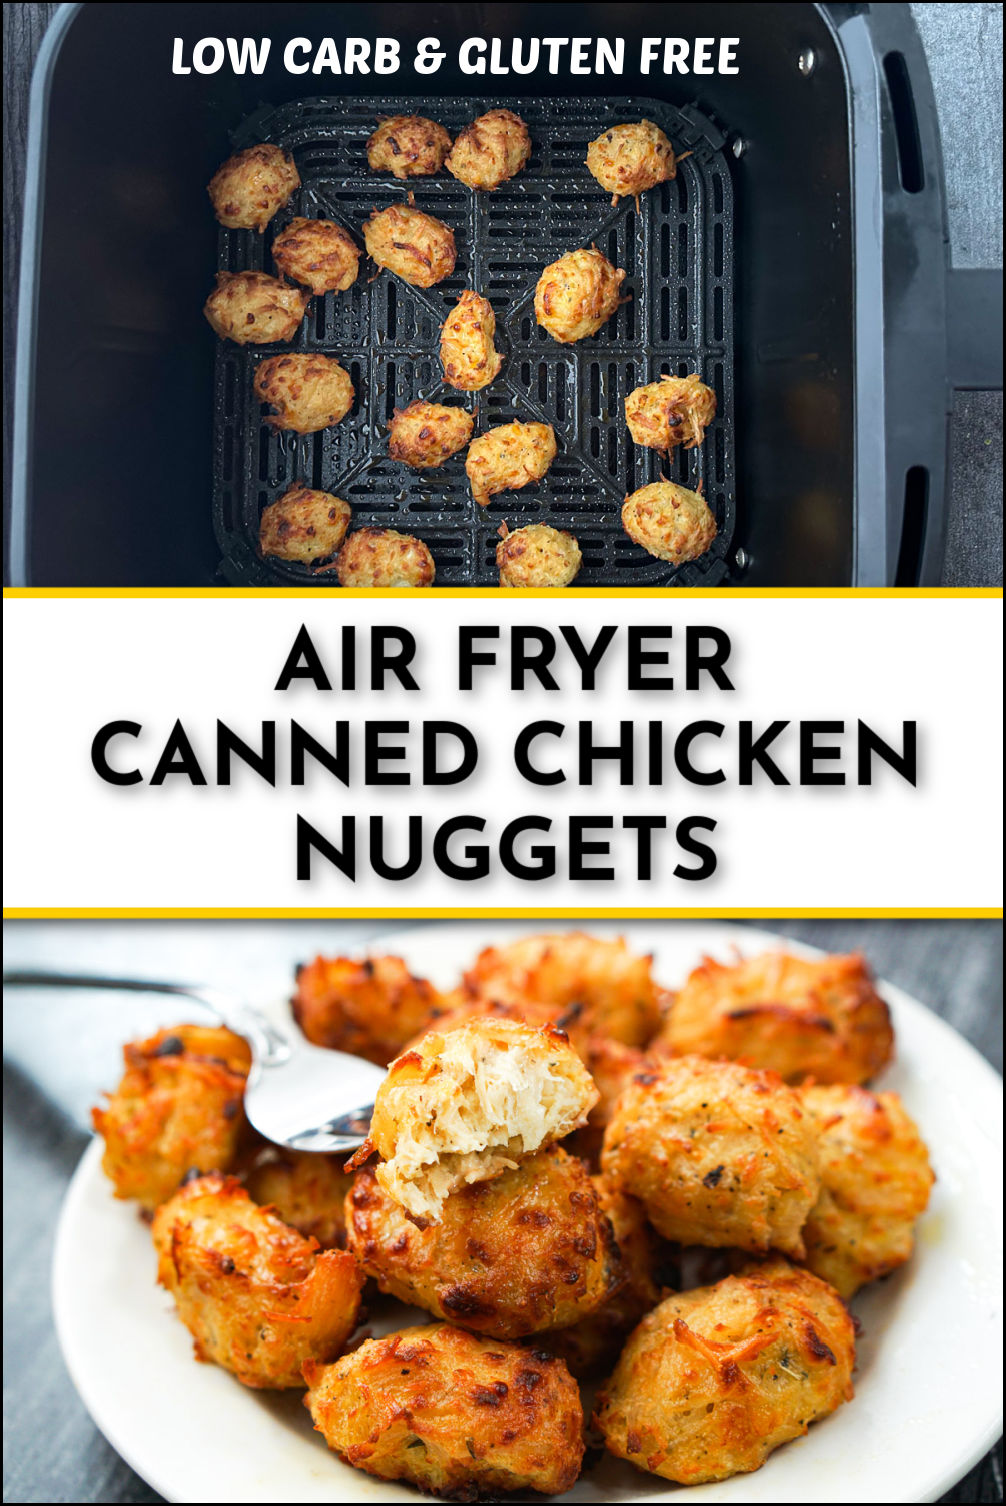 Keto Canned Chicken Nuggets in the Air Fryer | easy & gluten free